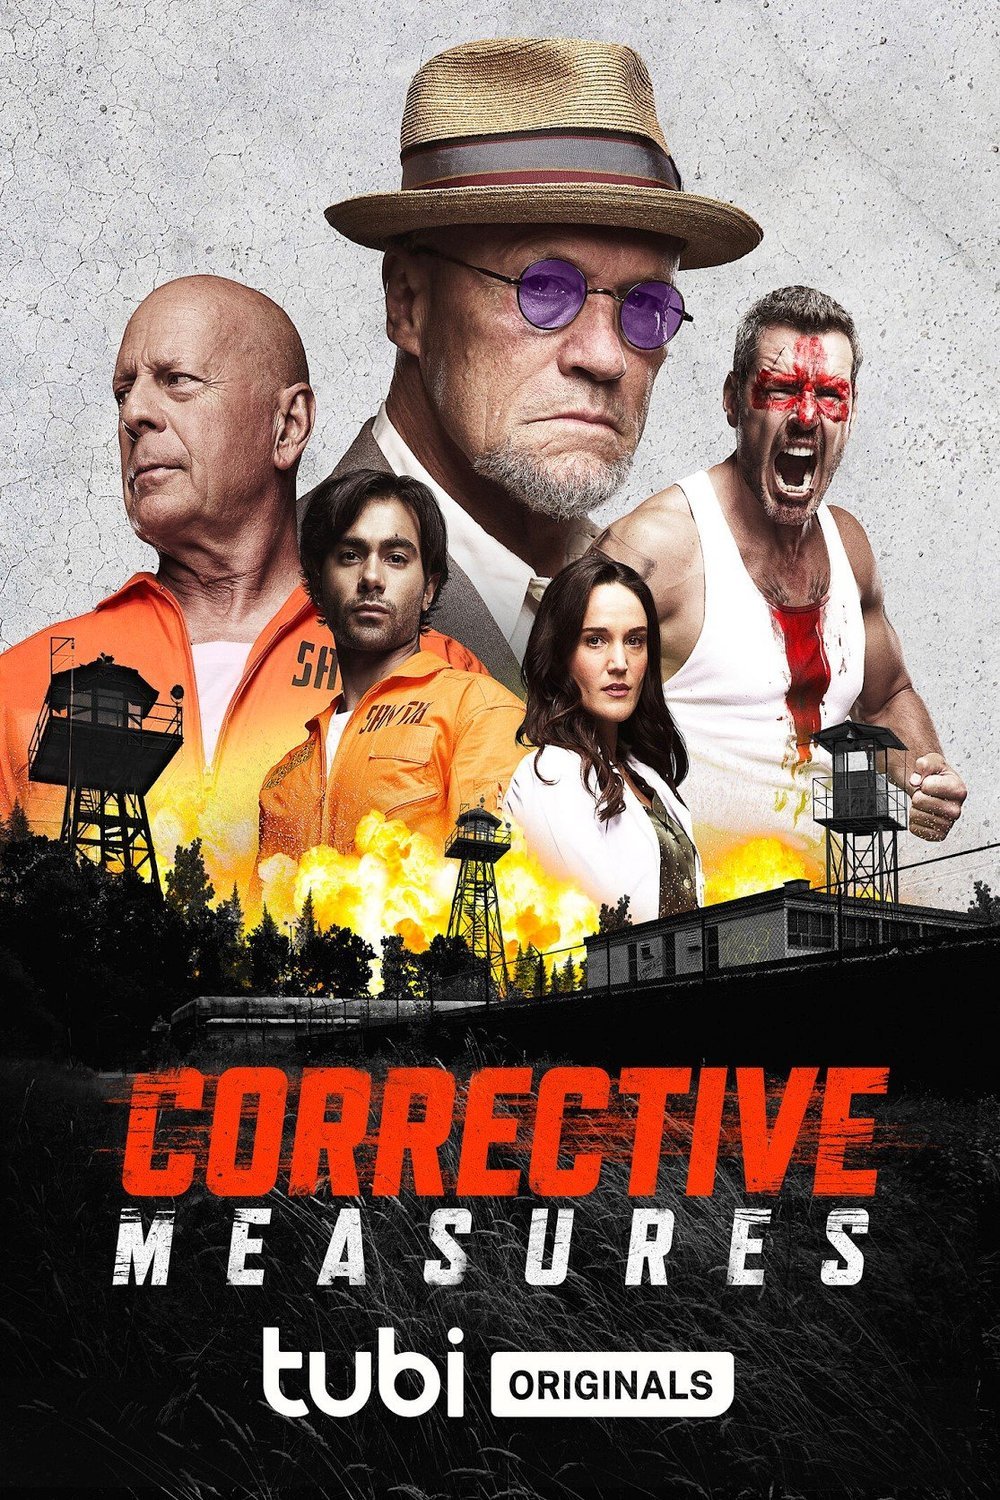 Poster of the movie Corrective Measures